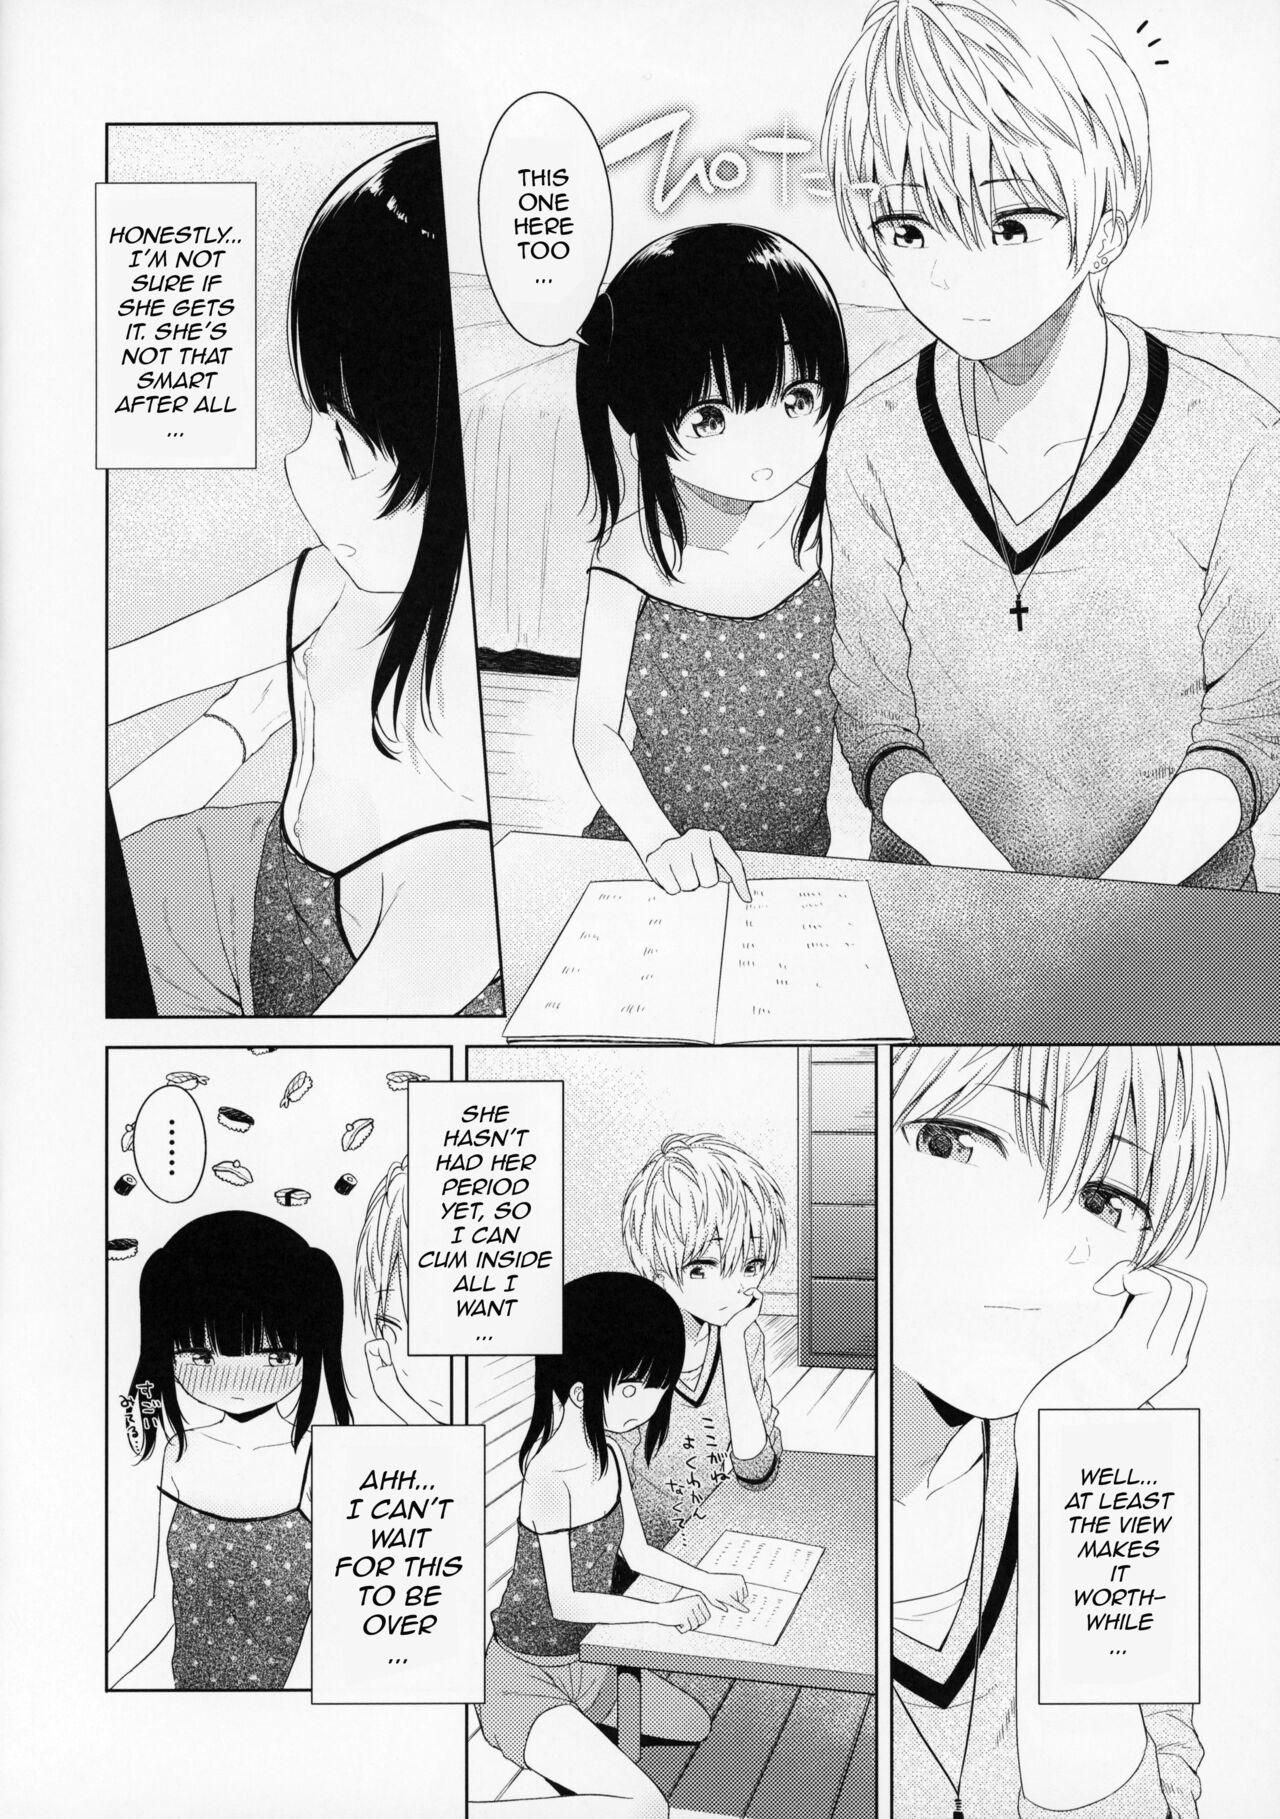 Perverted Trap of Love - Original Gay Friend - Page 7